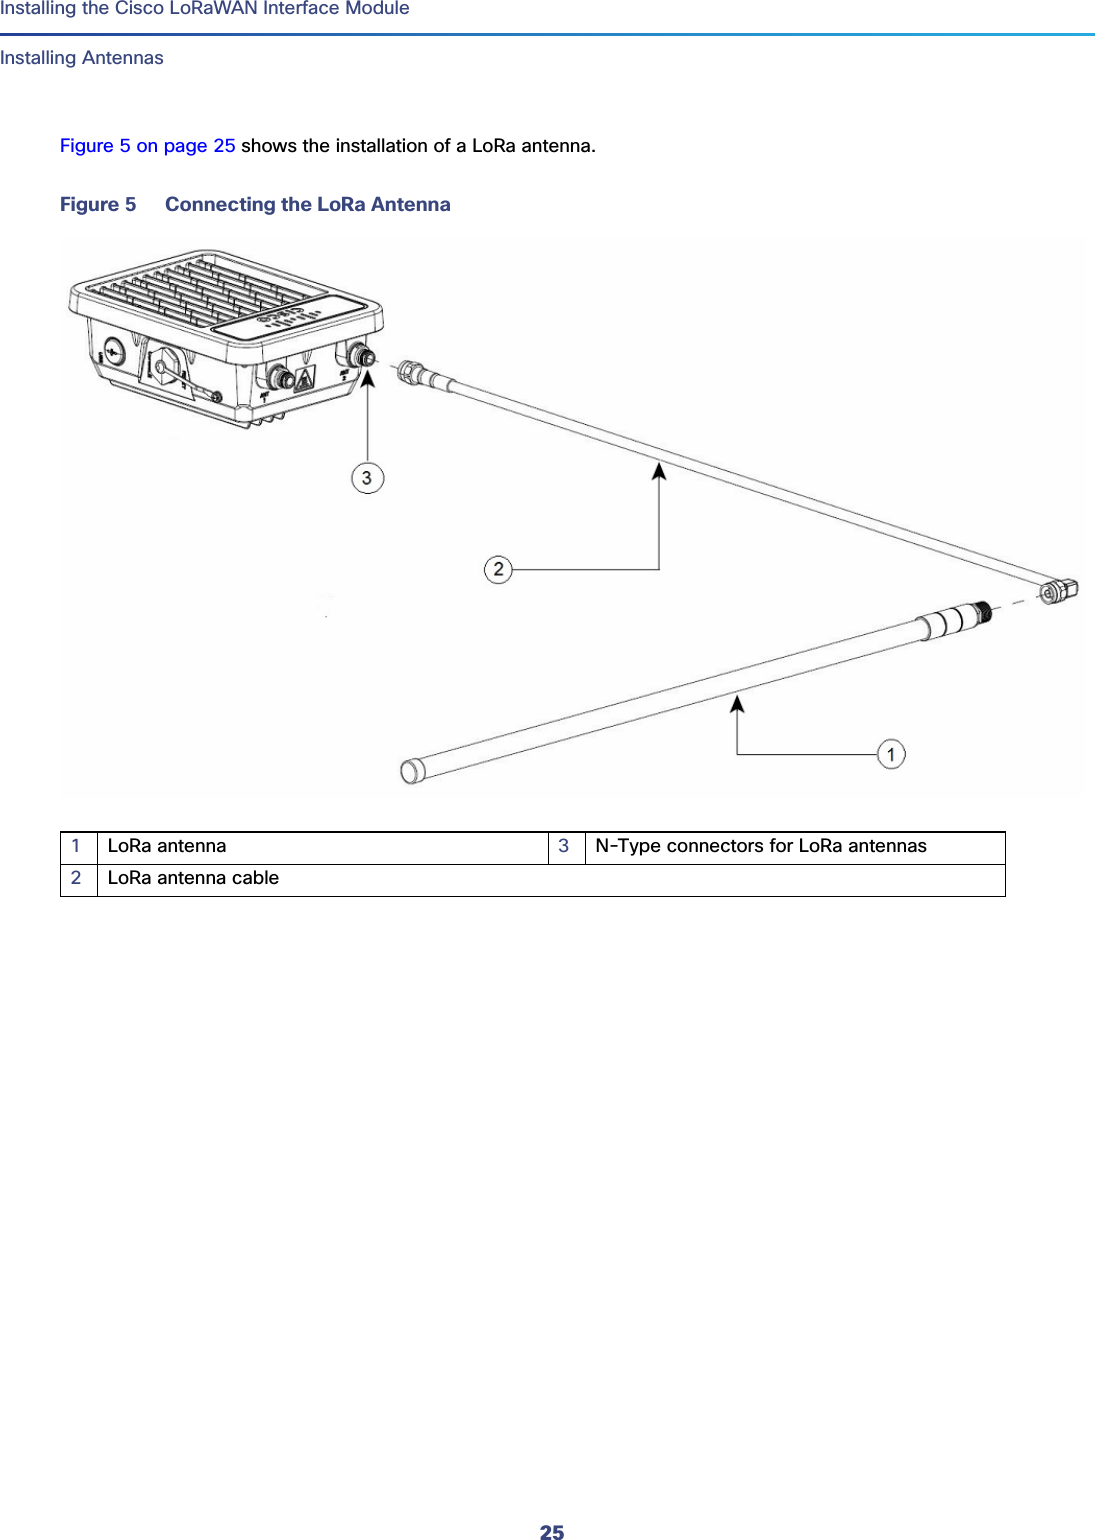 25  Installing the Cisco LoRaWAN Interface ModuleInstalling AntennasFigure 5 on page 25 shows the installation of a LoRa antenna.Figure 5 Connecting the LoRa Antenna1LoRa antenna 3N-Type connectors for LoRa antennas2LoRa antenna cable